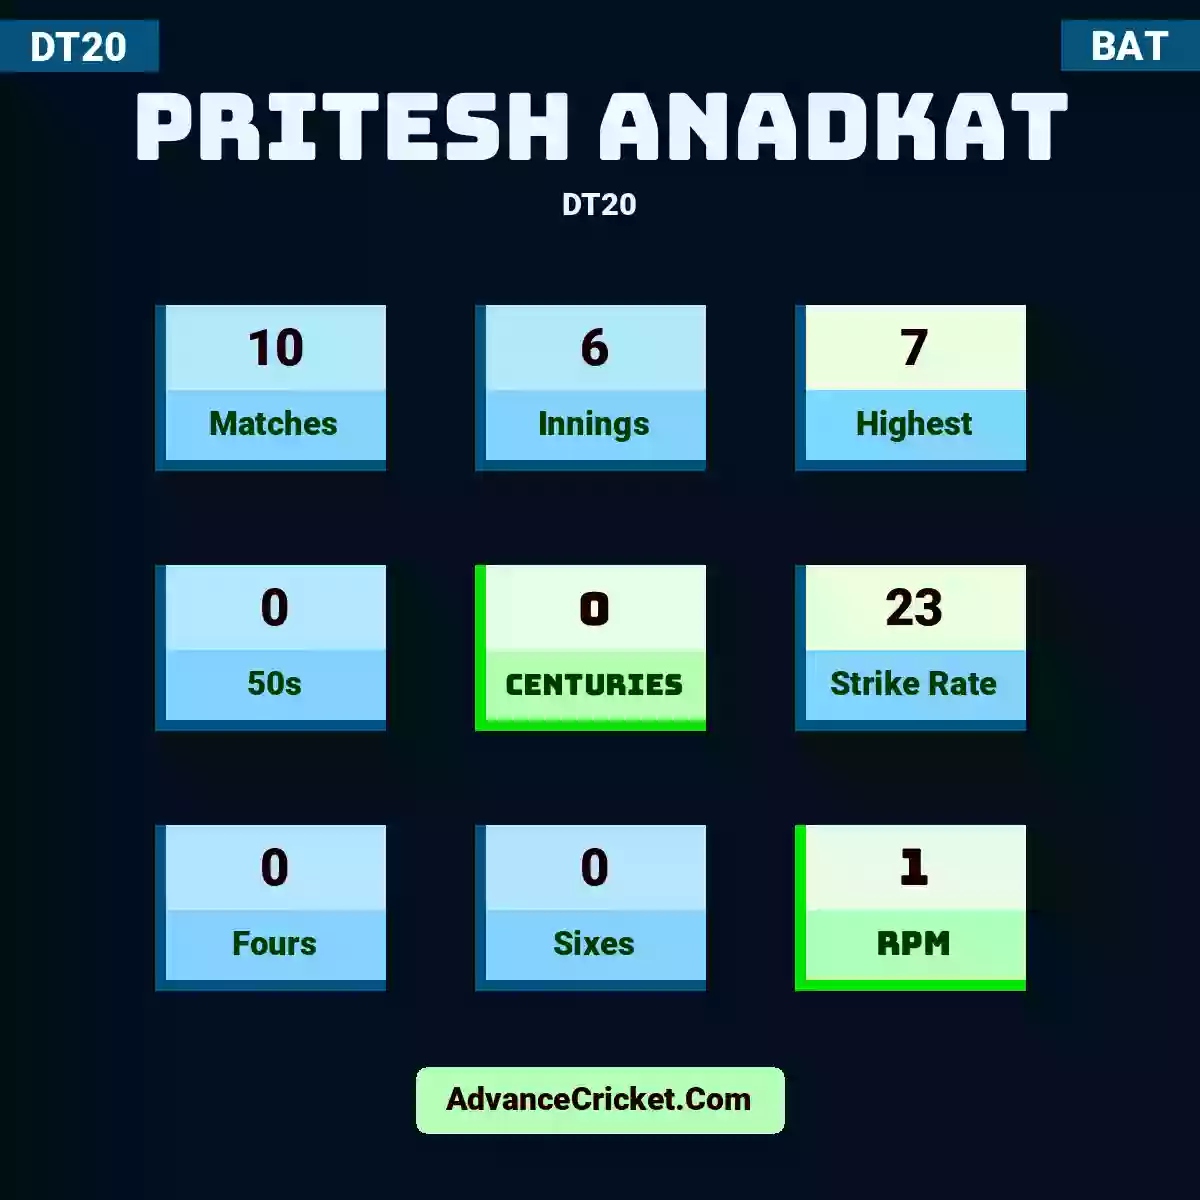 Pritesh Anadkat DT20 , Pritesh Anadkat played 10 matches, scored 7 runs as highest, 0 half-centuries, and 0 centuries, with a strike rate of 23. p.anadkat hit 0 fours and 0 sixes, with an RPM of 1.